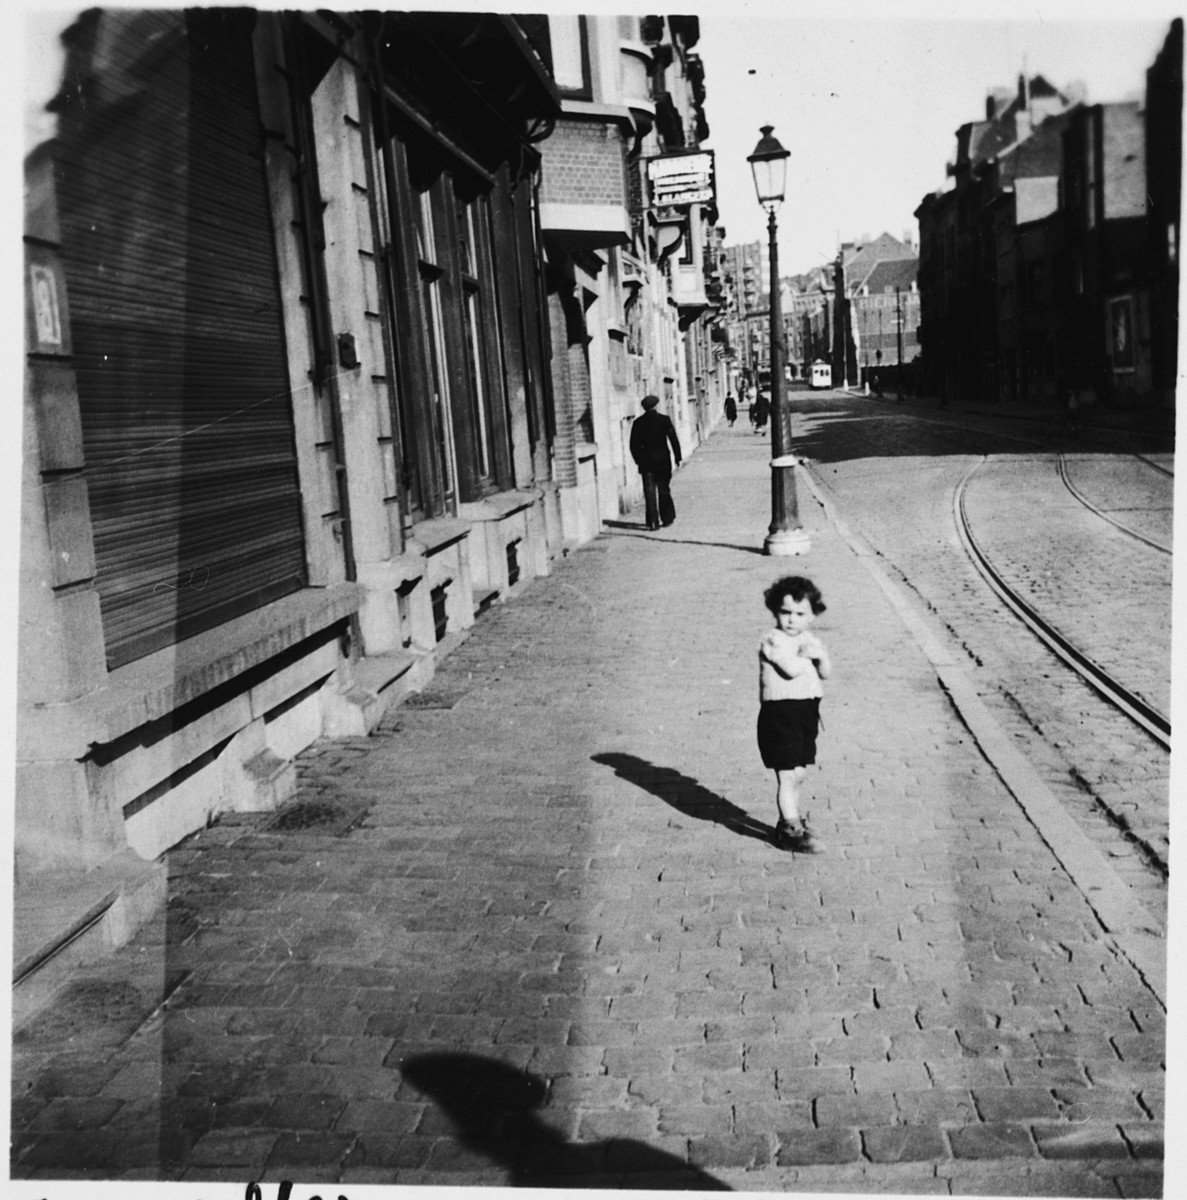 A young Jewish boy poses on a sidewalk in Brussels, near the apartment where he is living in hiding as a Christian with his parents.

Pictured is Nathan (Nounou) Ciechanow.  He was subsequently deported to his death in Auschwitz.